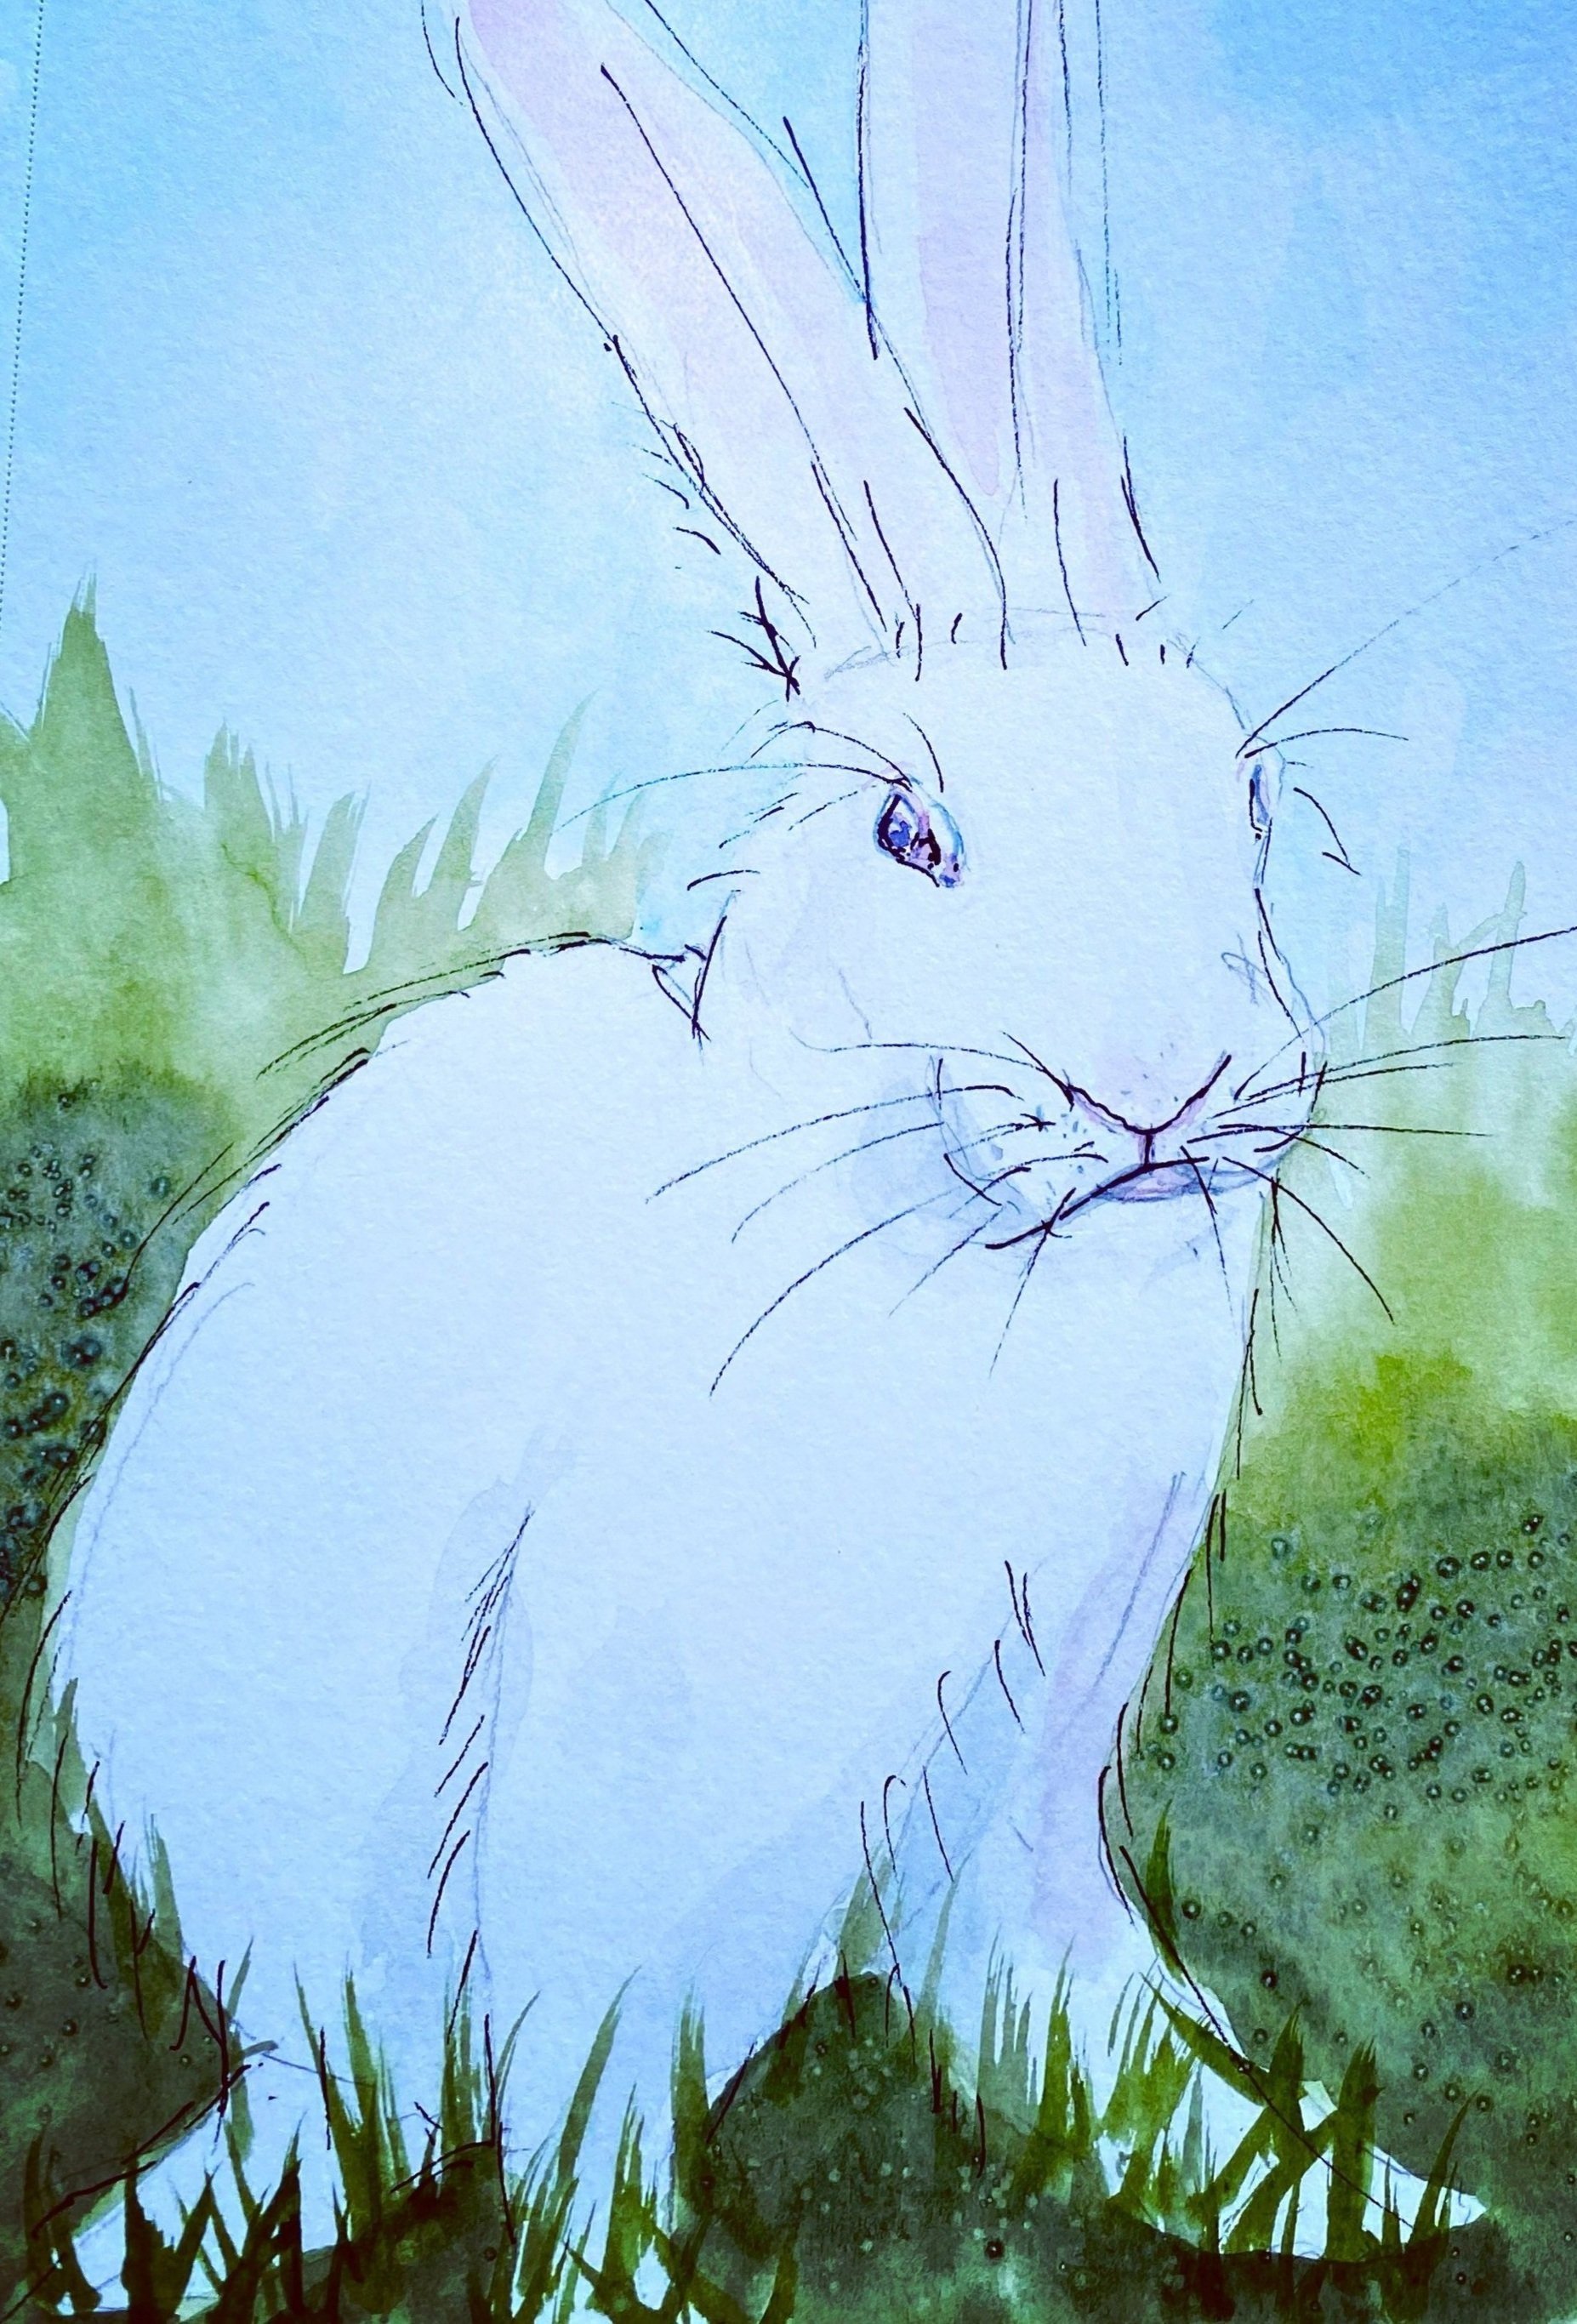 Rabbit image for March.jpg